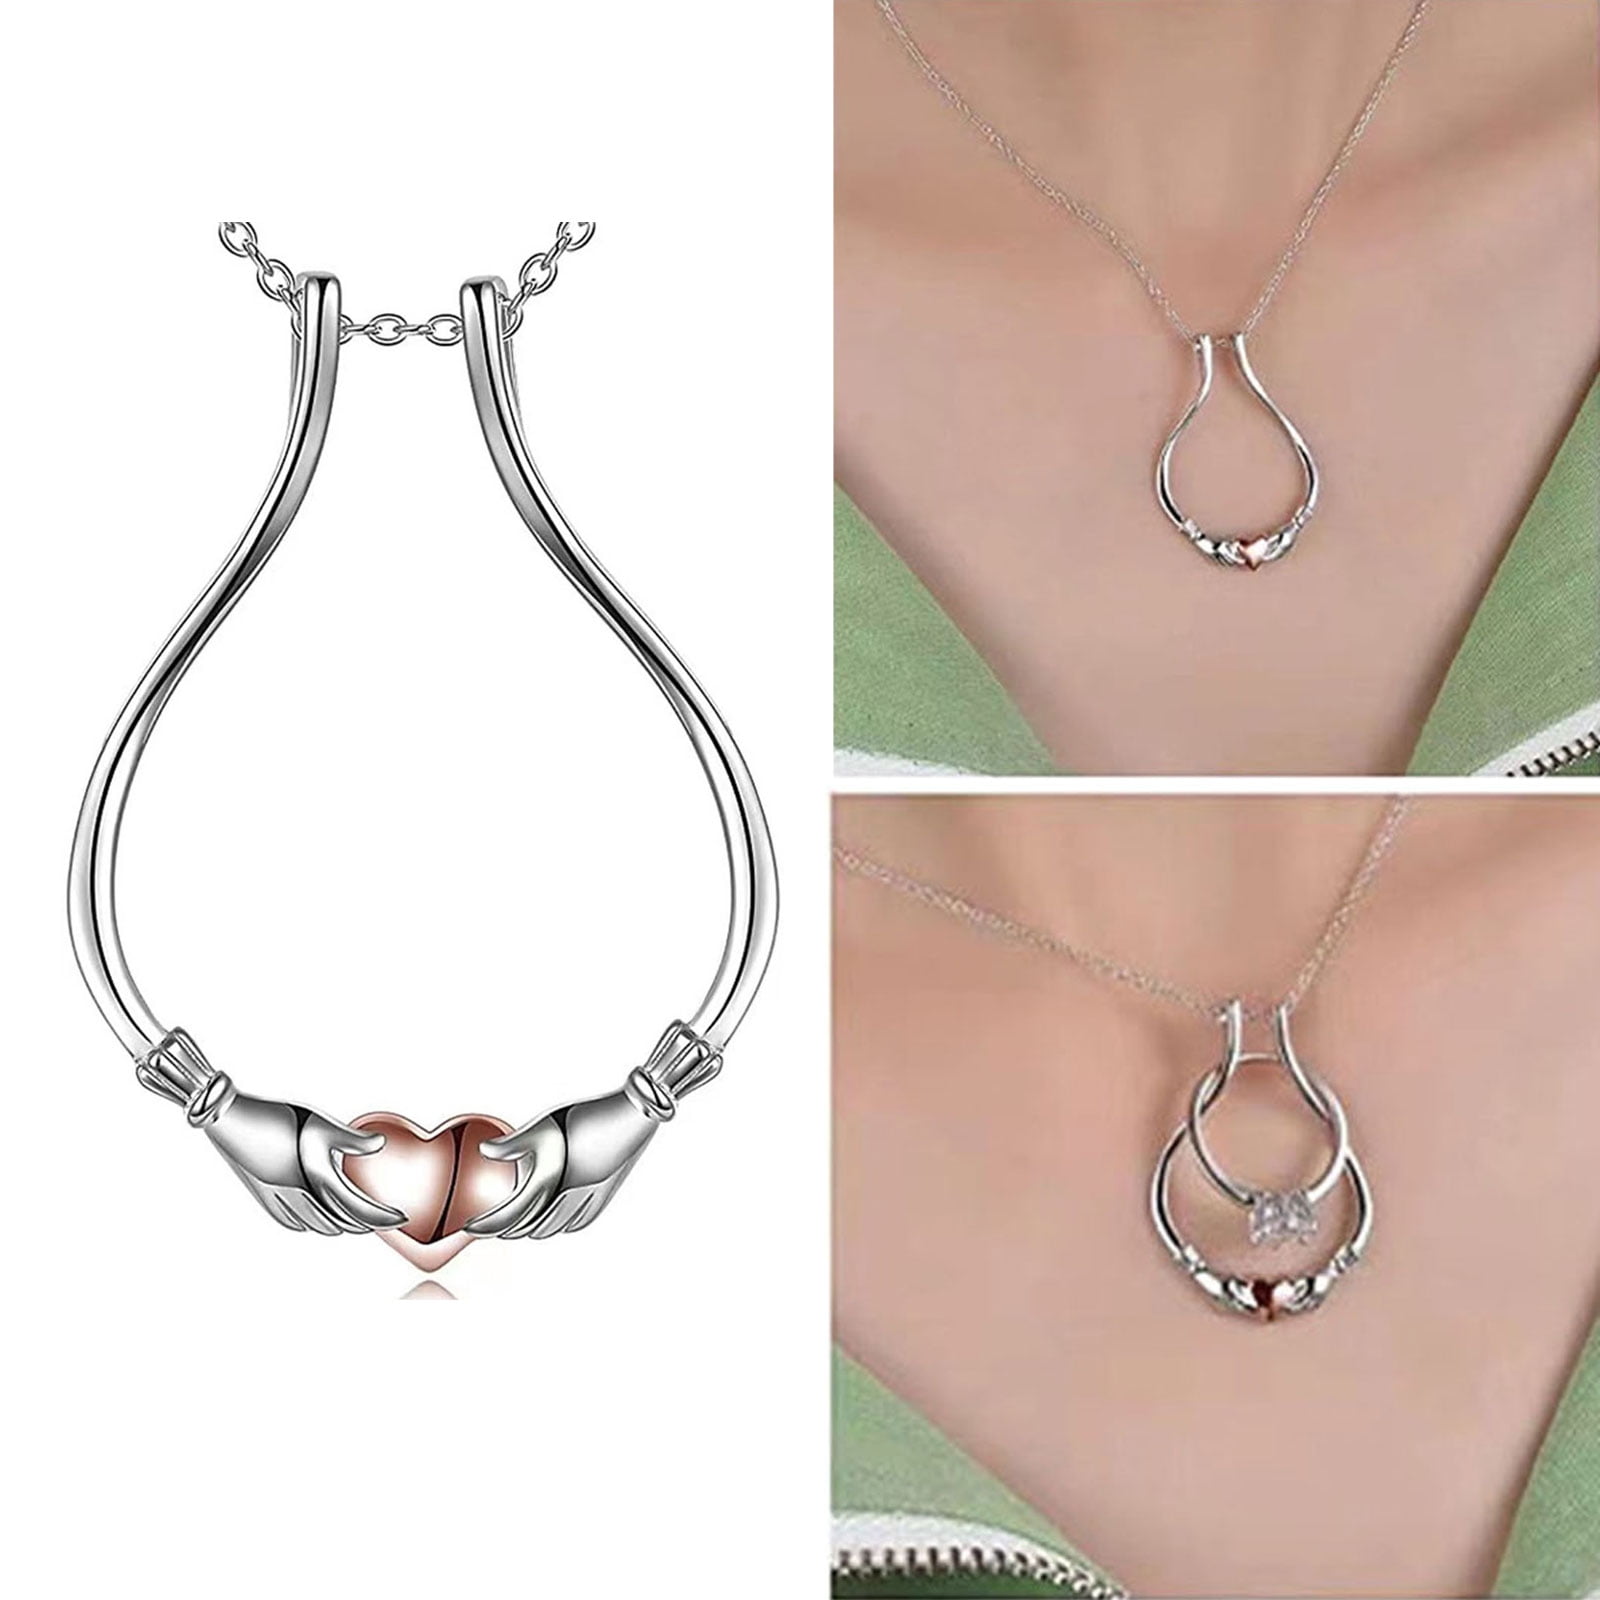 Ring Holder Necklace | Handmade 925 Sterling Silver Ring-holding Necklaces